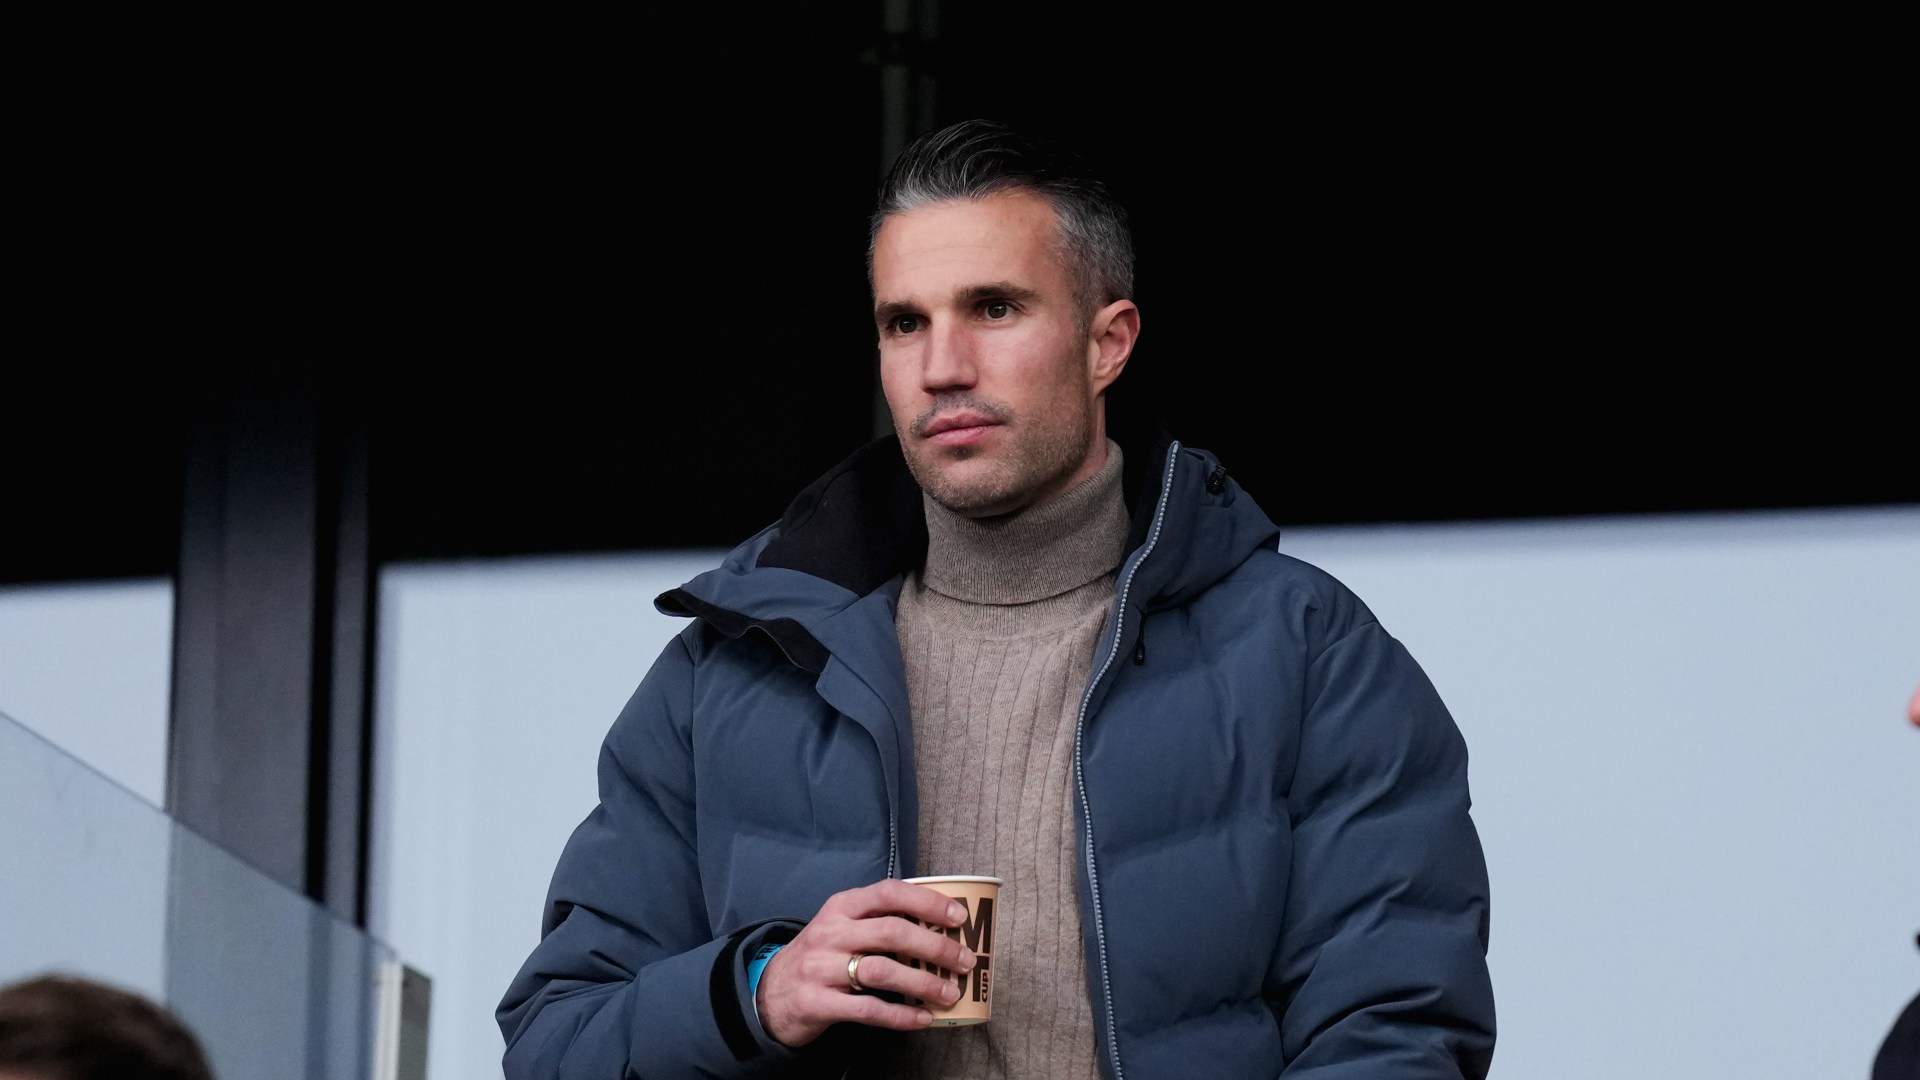 Former Man Utd and Arsenal star Robin van Persie, 40, ‘in talks over shock first manager job’ [Video]